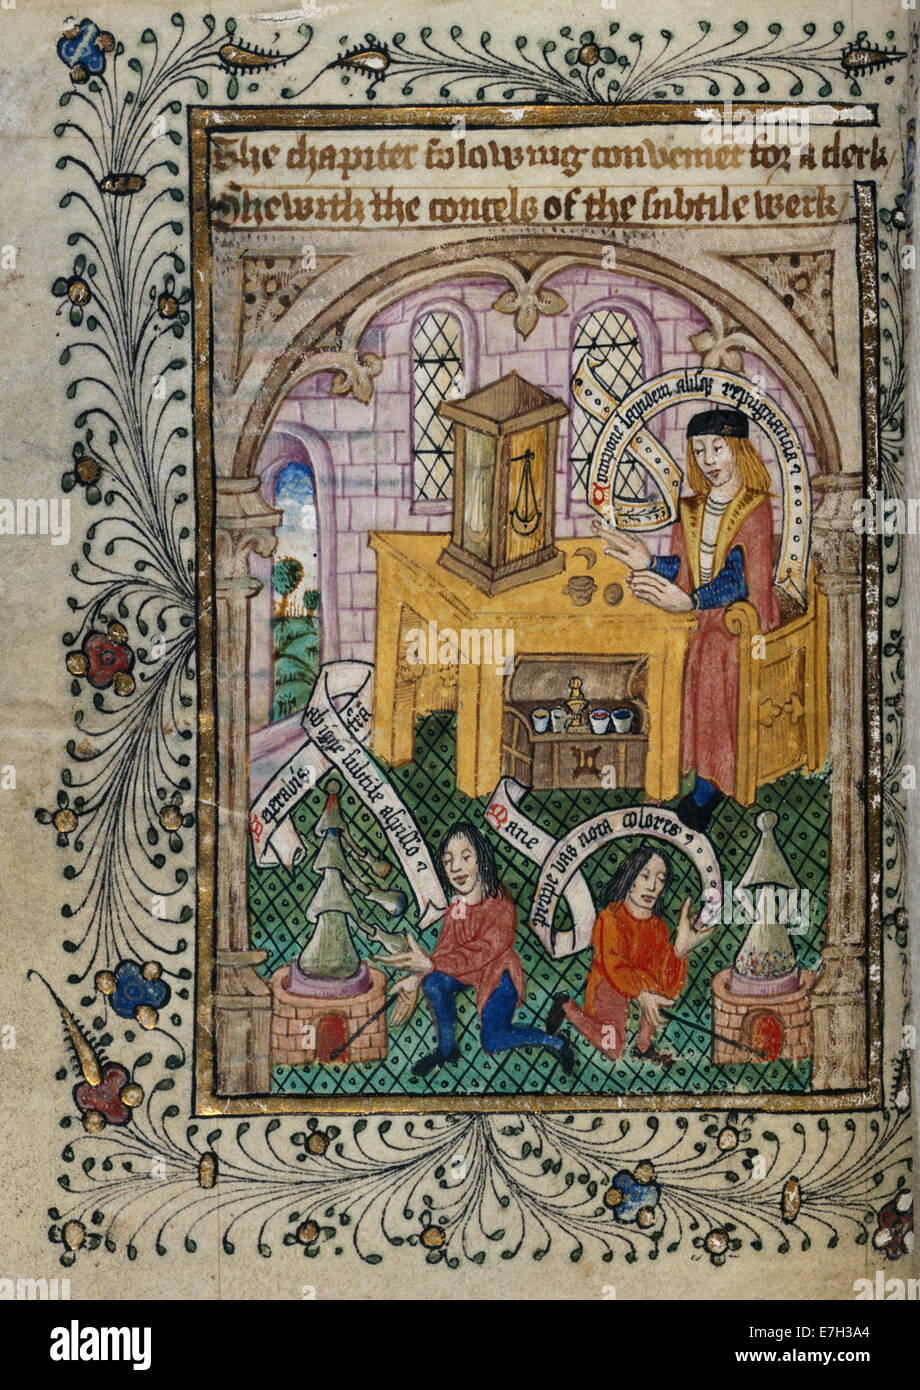 Preparation of experiments - The Ordinal of Alchemy (c.1477), f.37v - BL Add MS 10302 Stock Photo